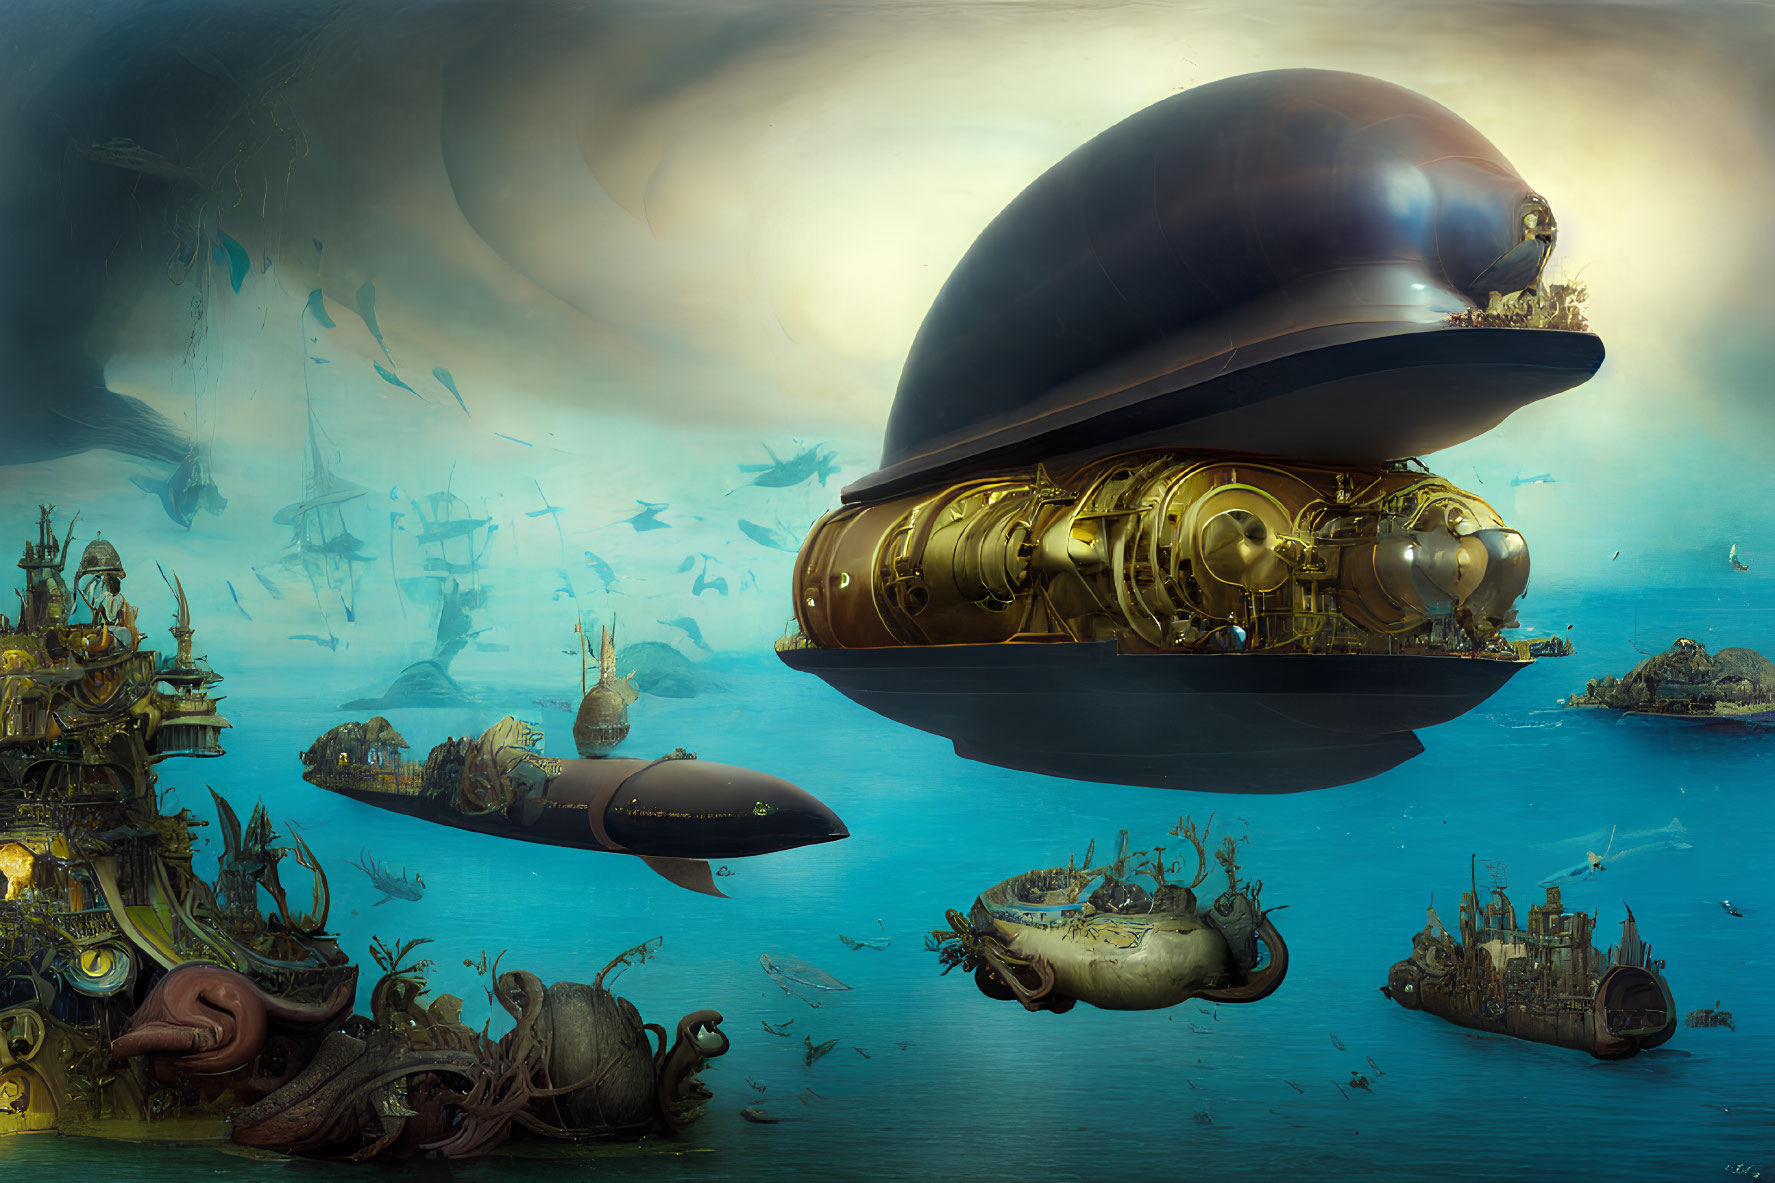 Surreal futuristic airship art with floating cities in dreamlike sky